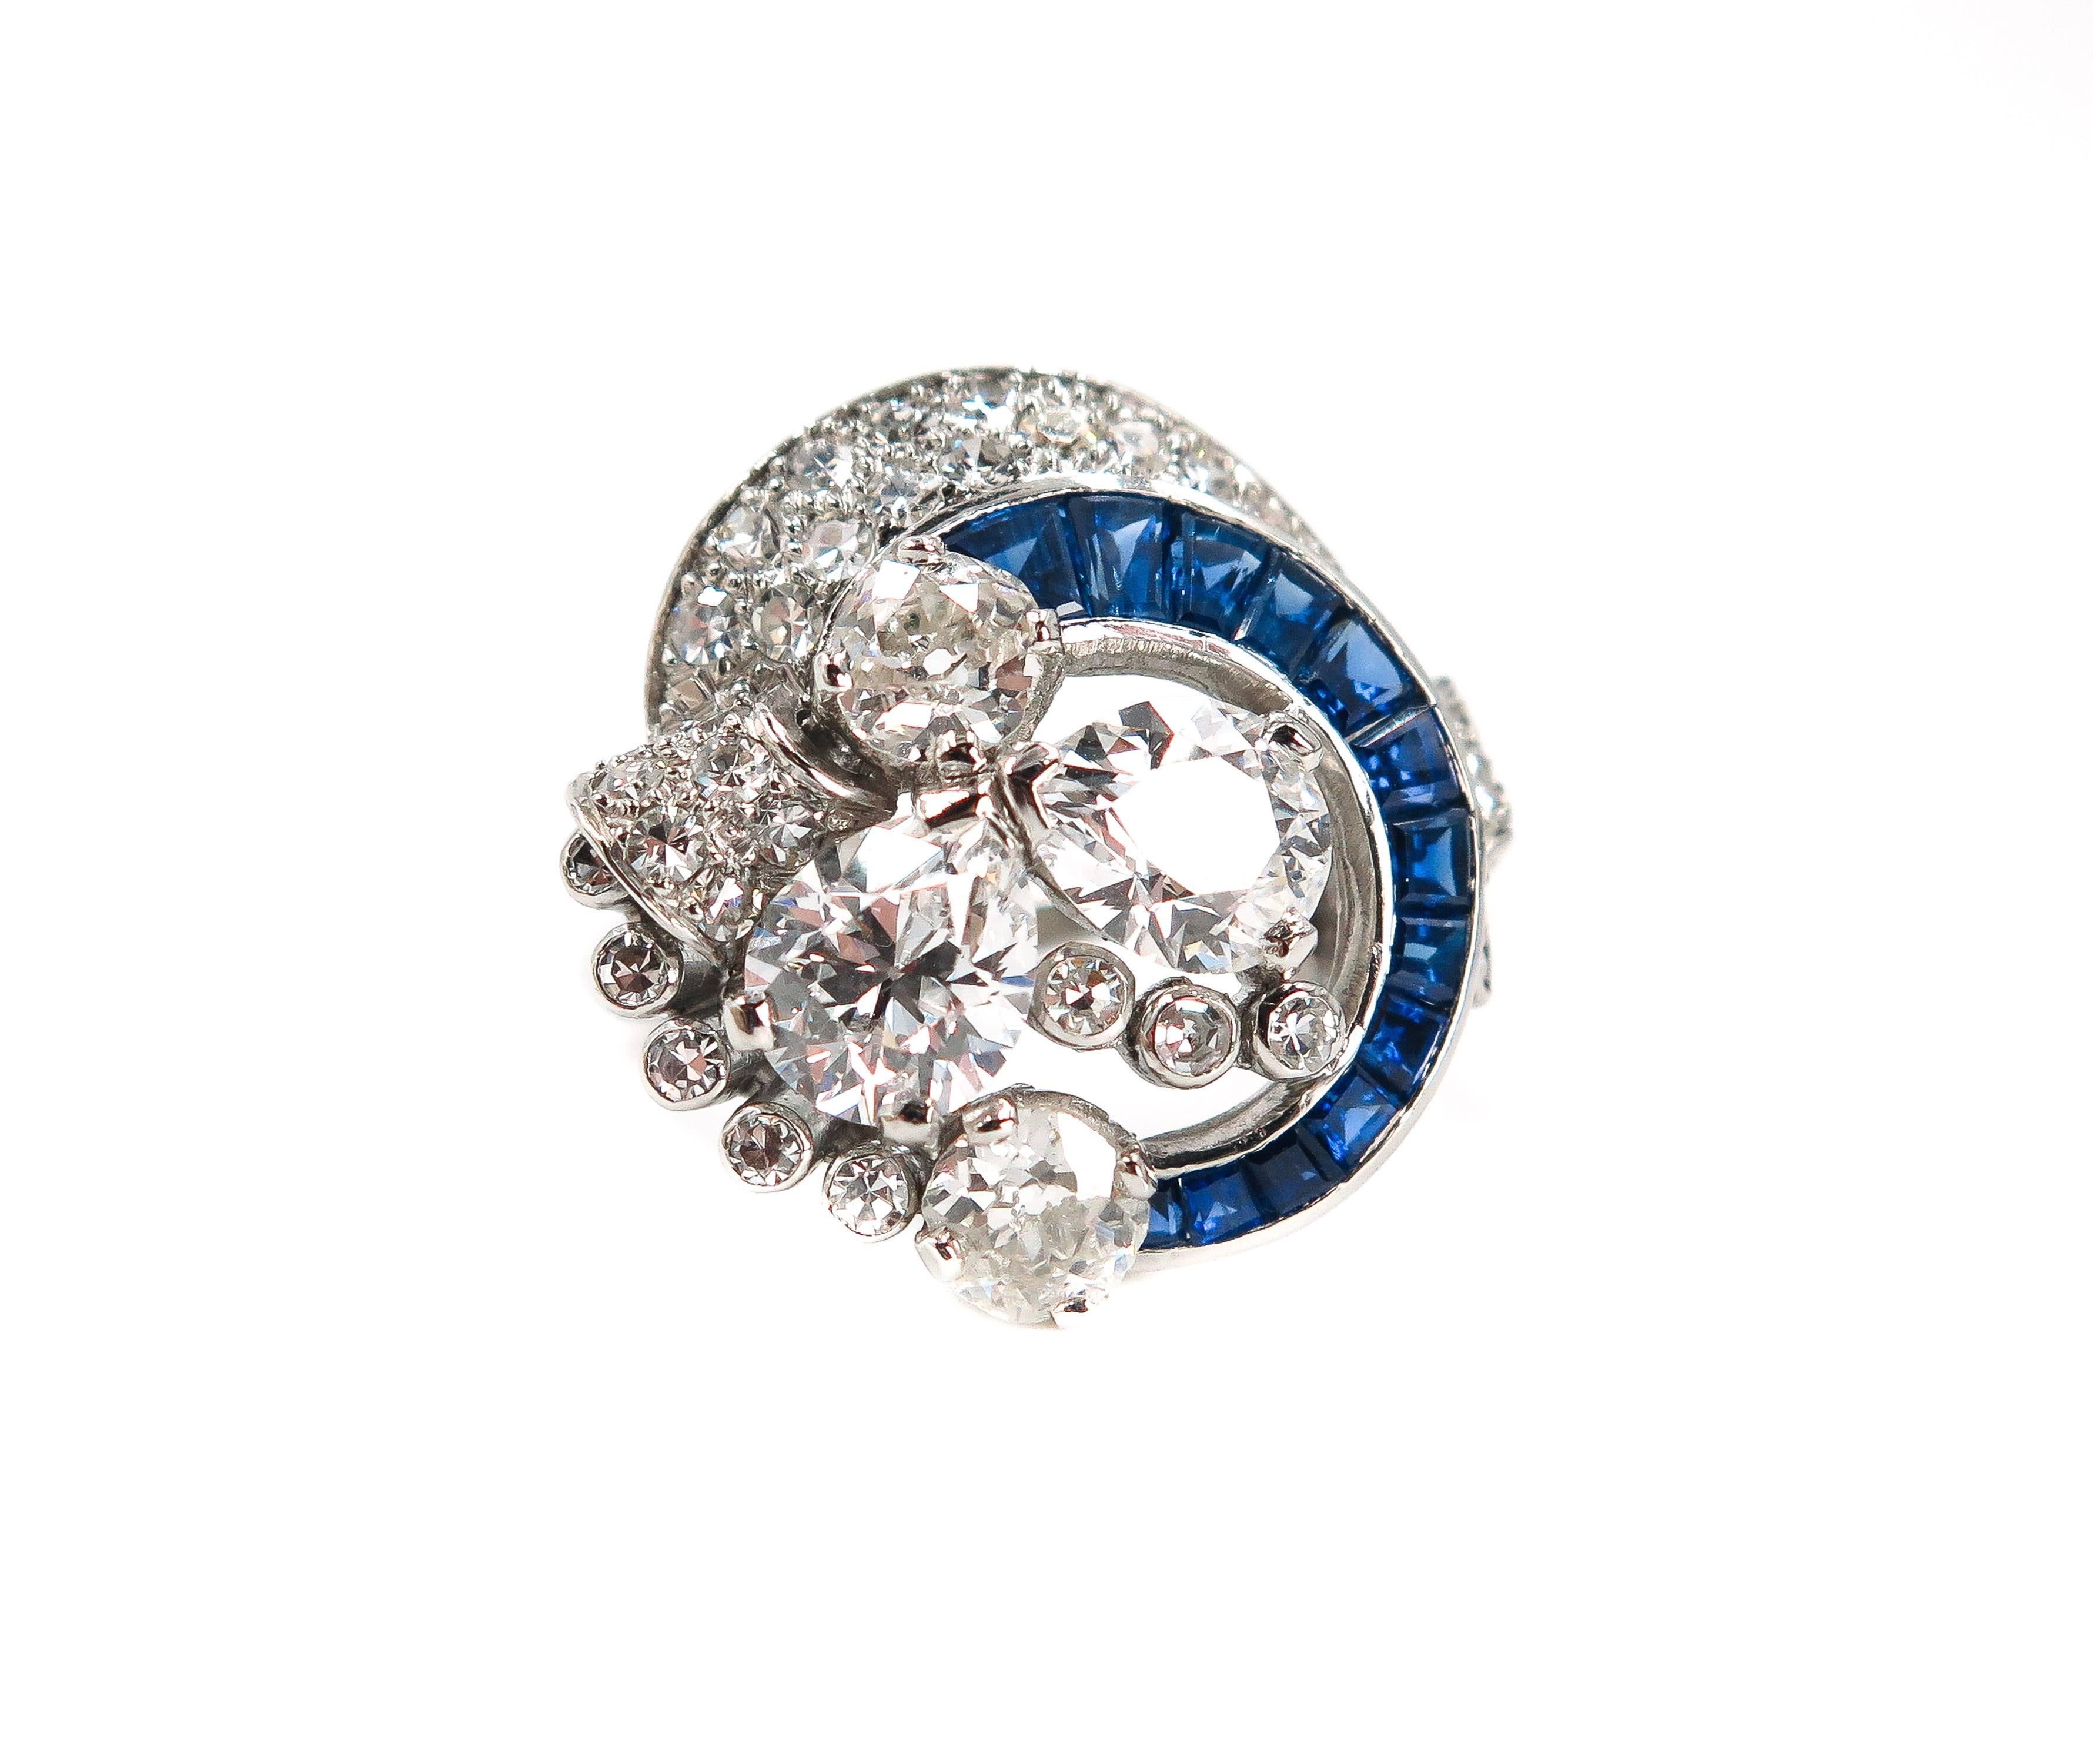 The word Twist was used to describe a popular dance in the early 1960s.
Twist means writhing, pirouette, the same idea that inspired this ring, in a whirlwind of white gold and precious blue sapphires and diamonds expressing a sense of playful